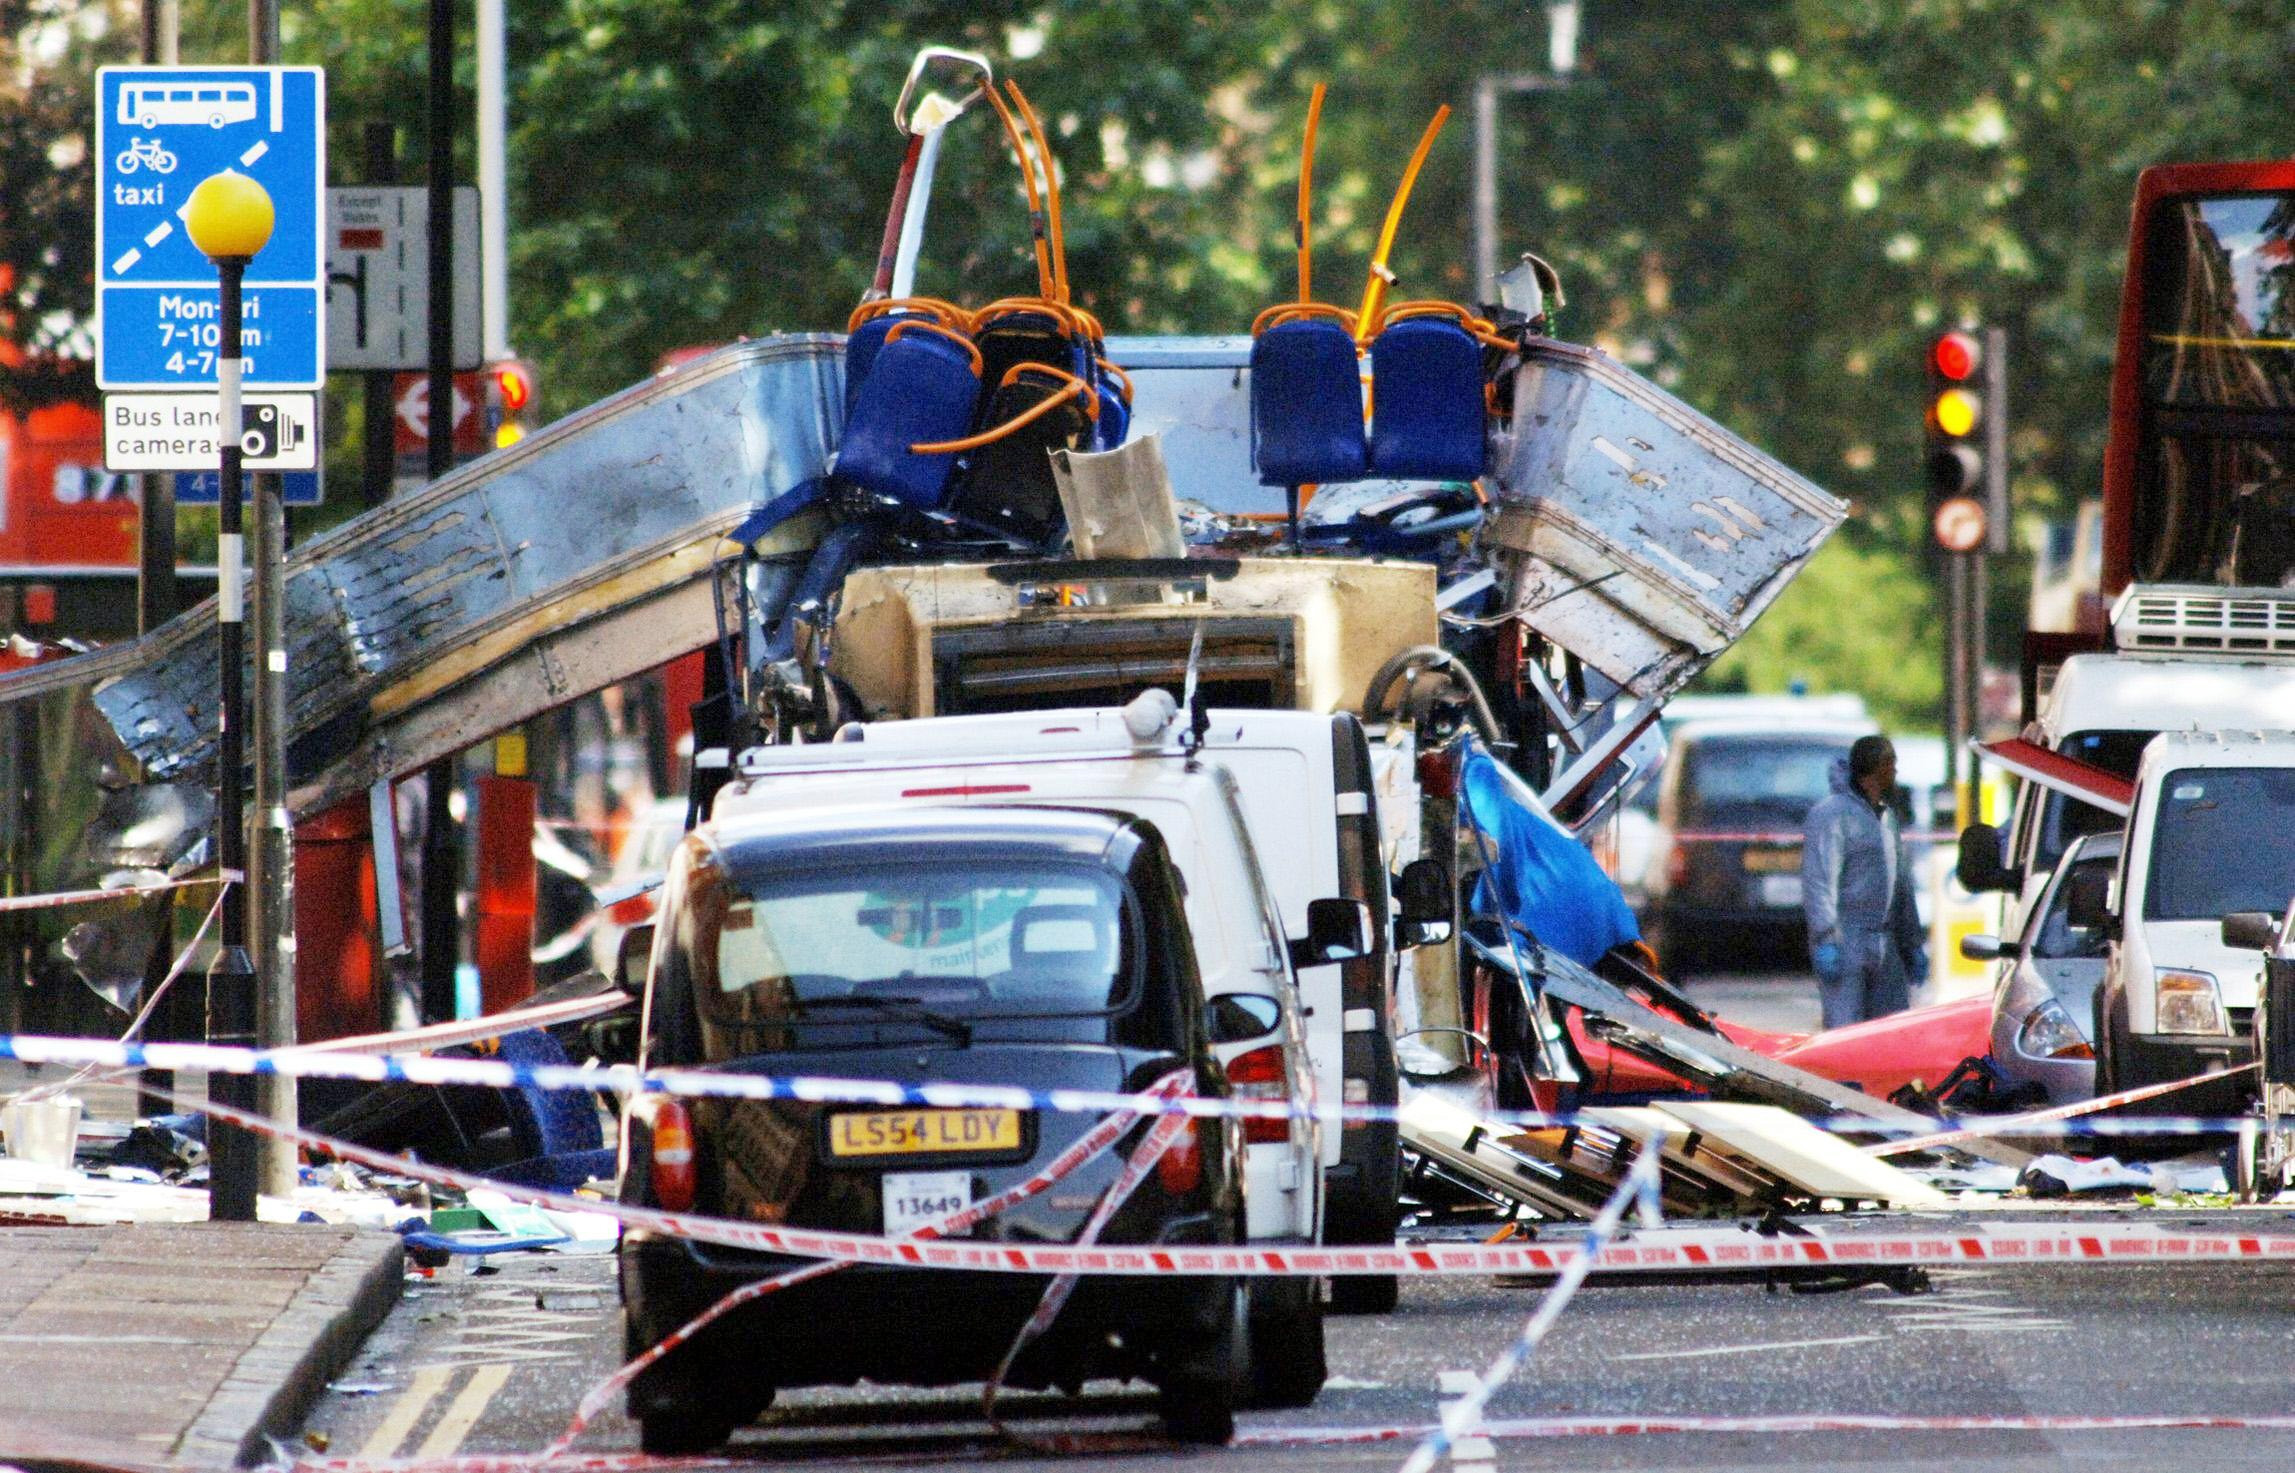 The scene in Tavistock Square, Central London, after a bomb ripped through a double decker bus in 2005 (PA)